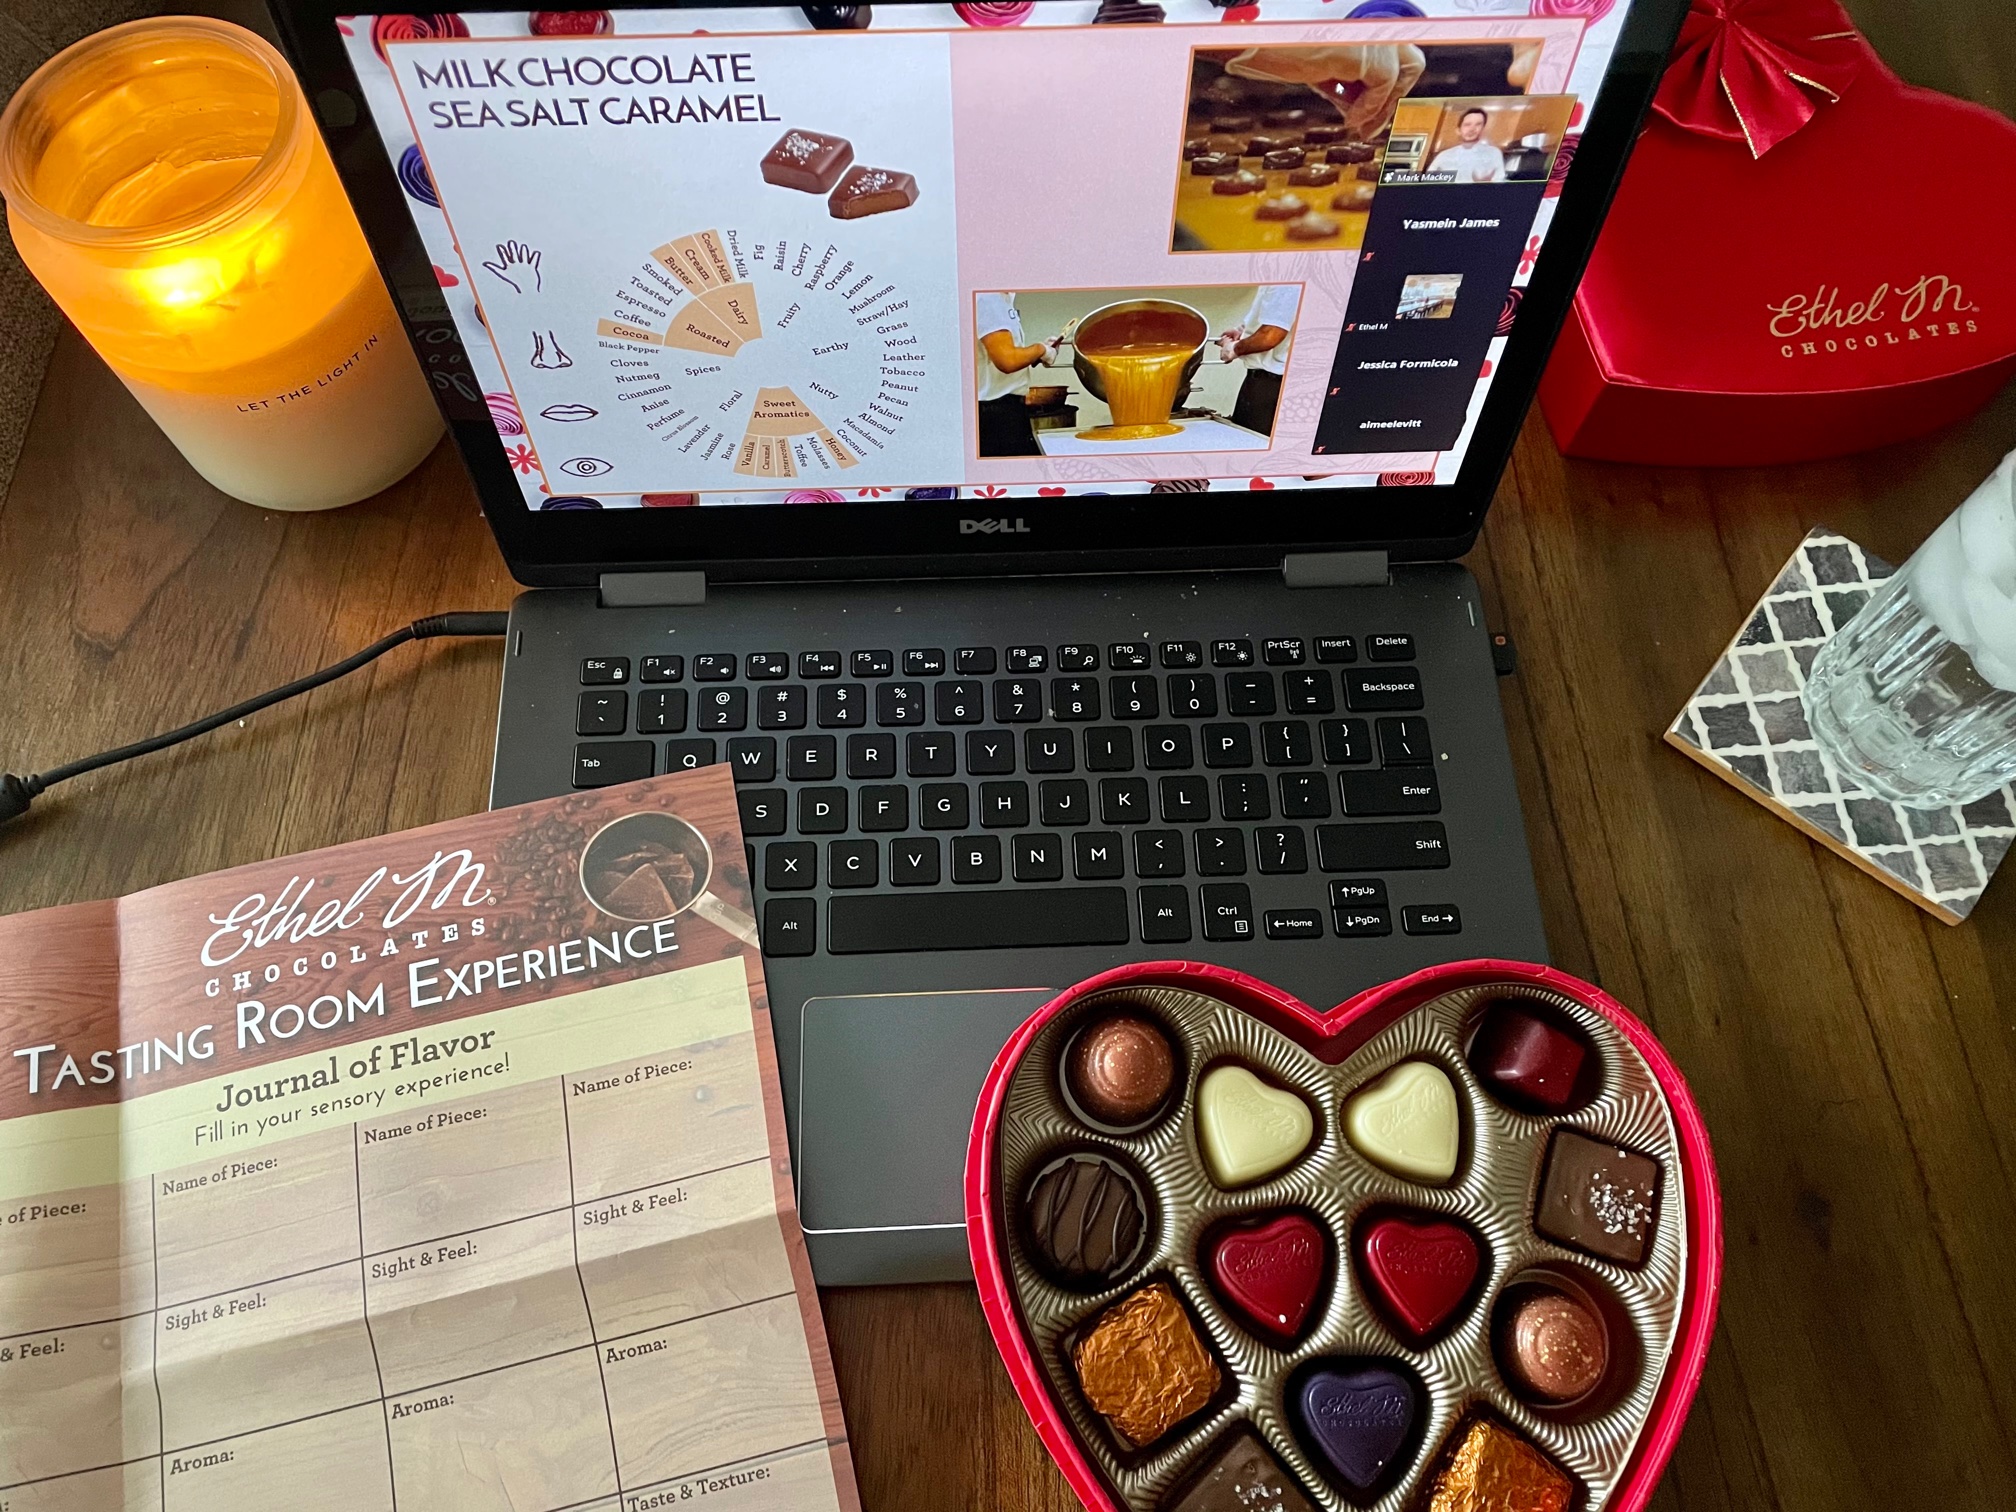 Here's What I Learned During Ethel M Chocolates Chocolate Tasting